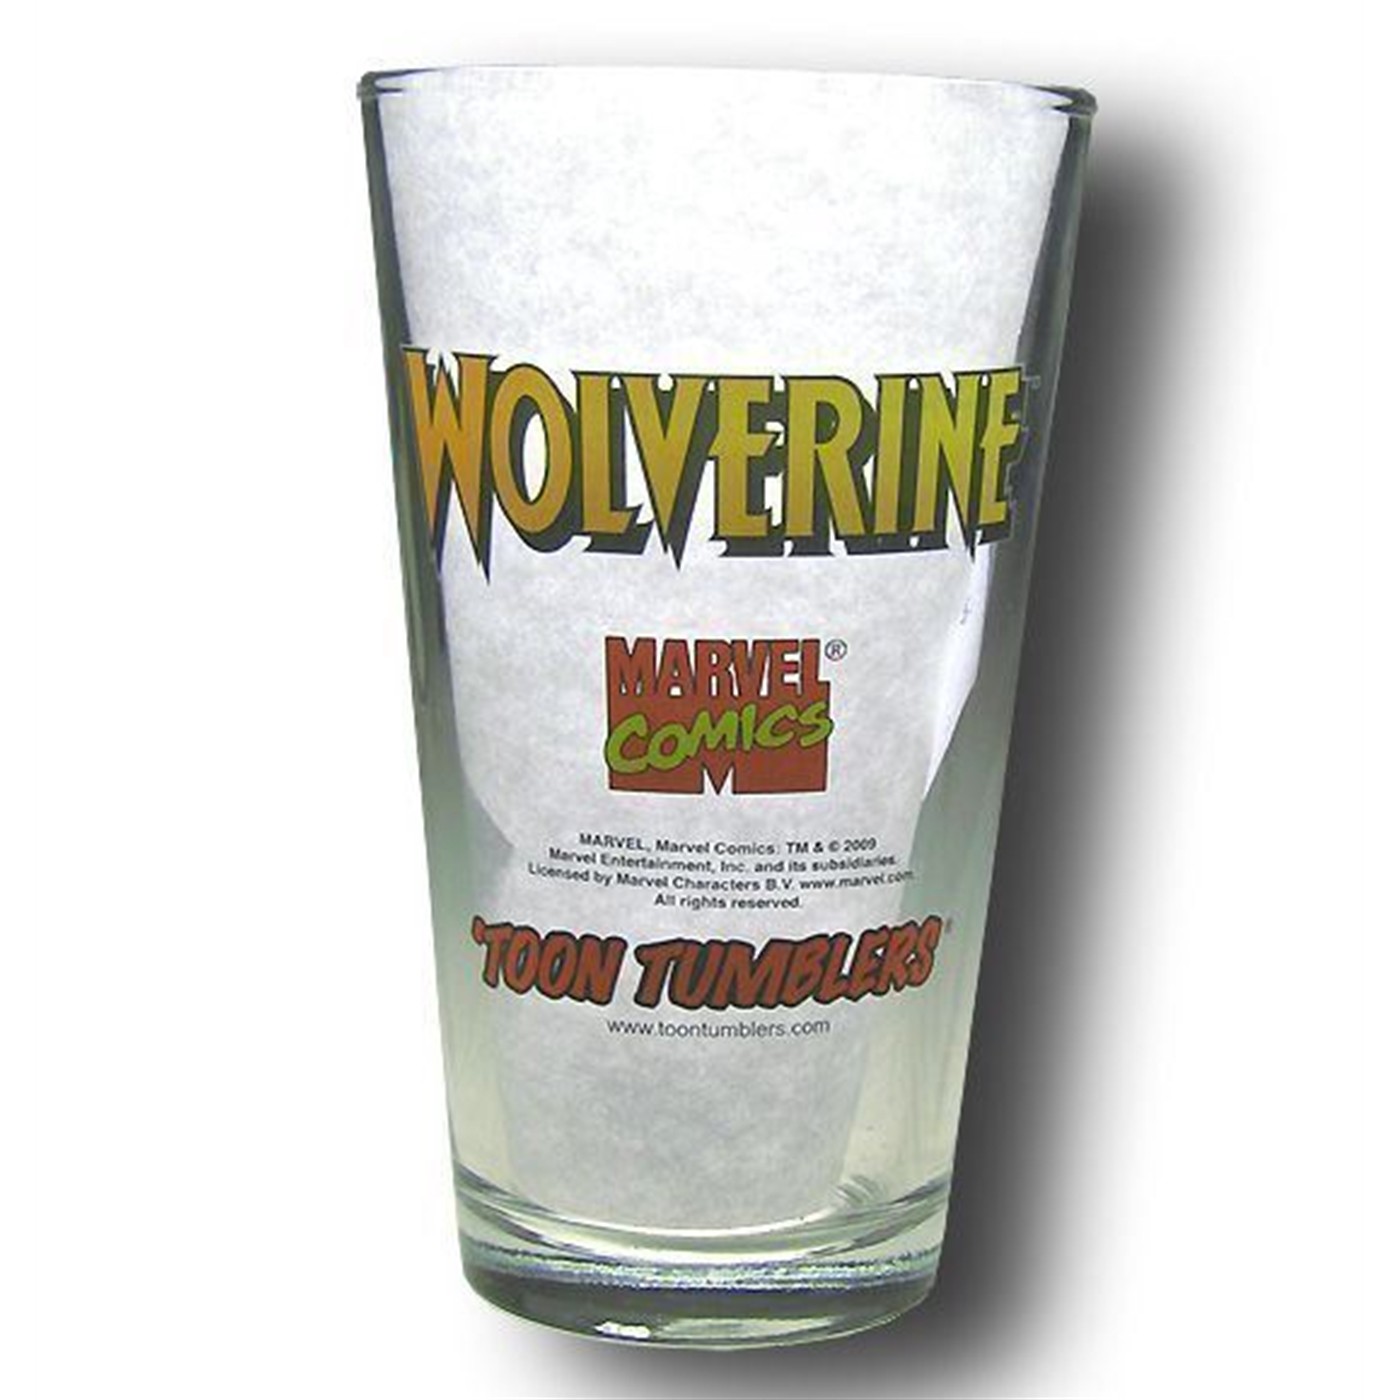 Wolverine in Brown by John Byrne Clear Pint Glass